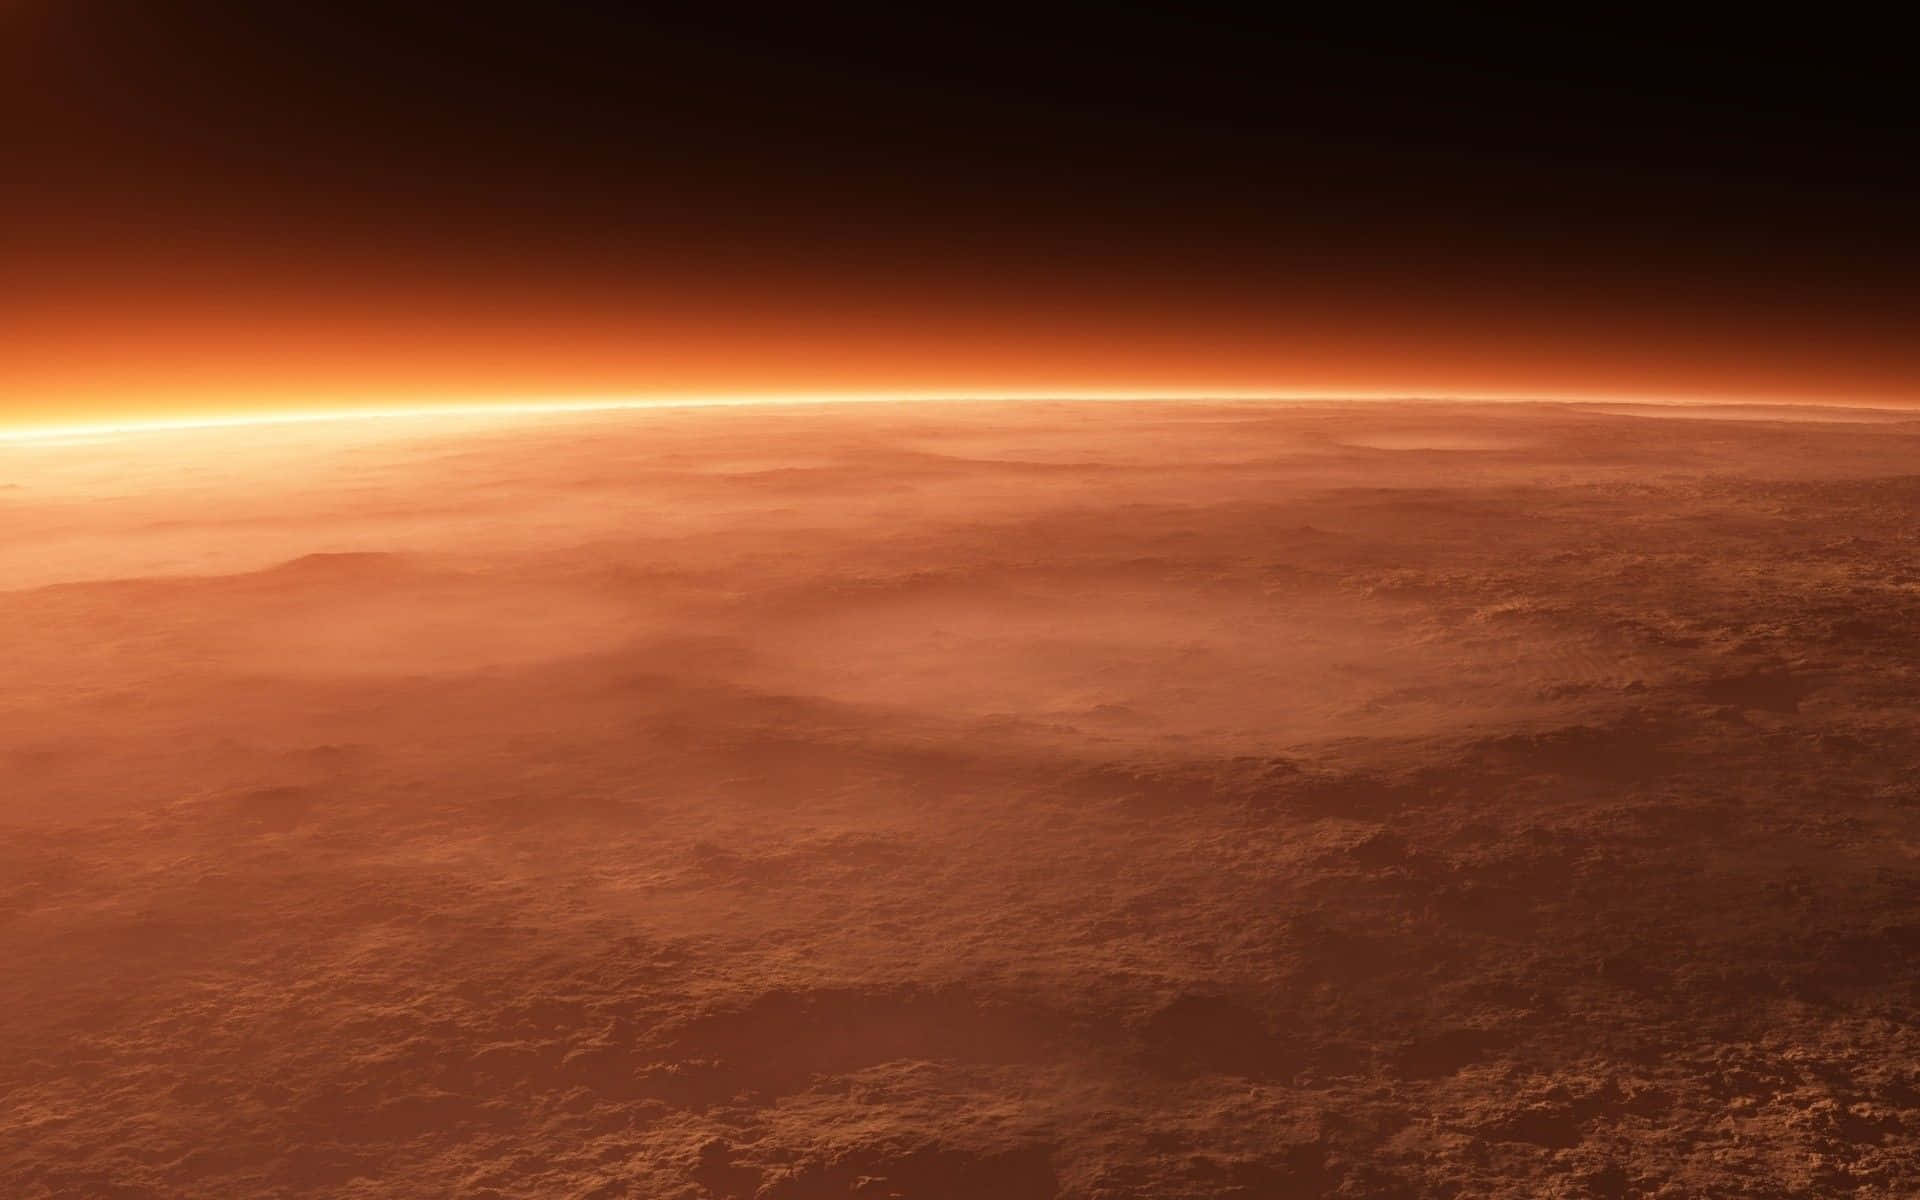 Stunning Mars Landscape with a Dominating Red Planet Wallpaper